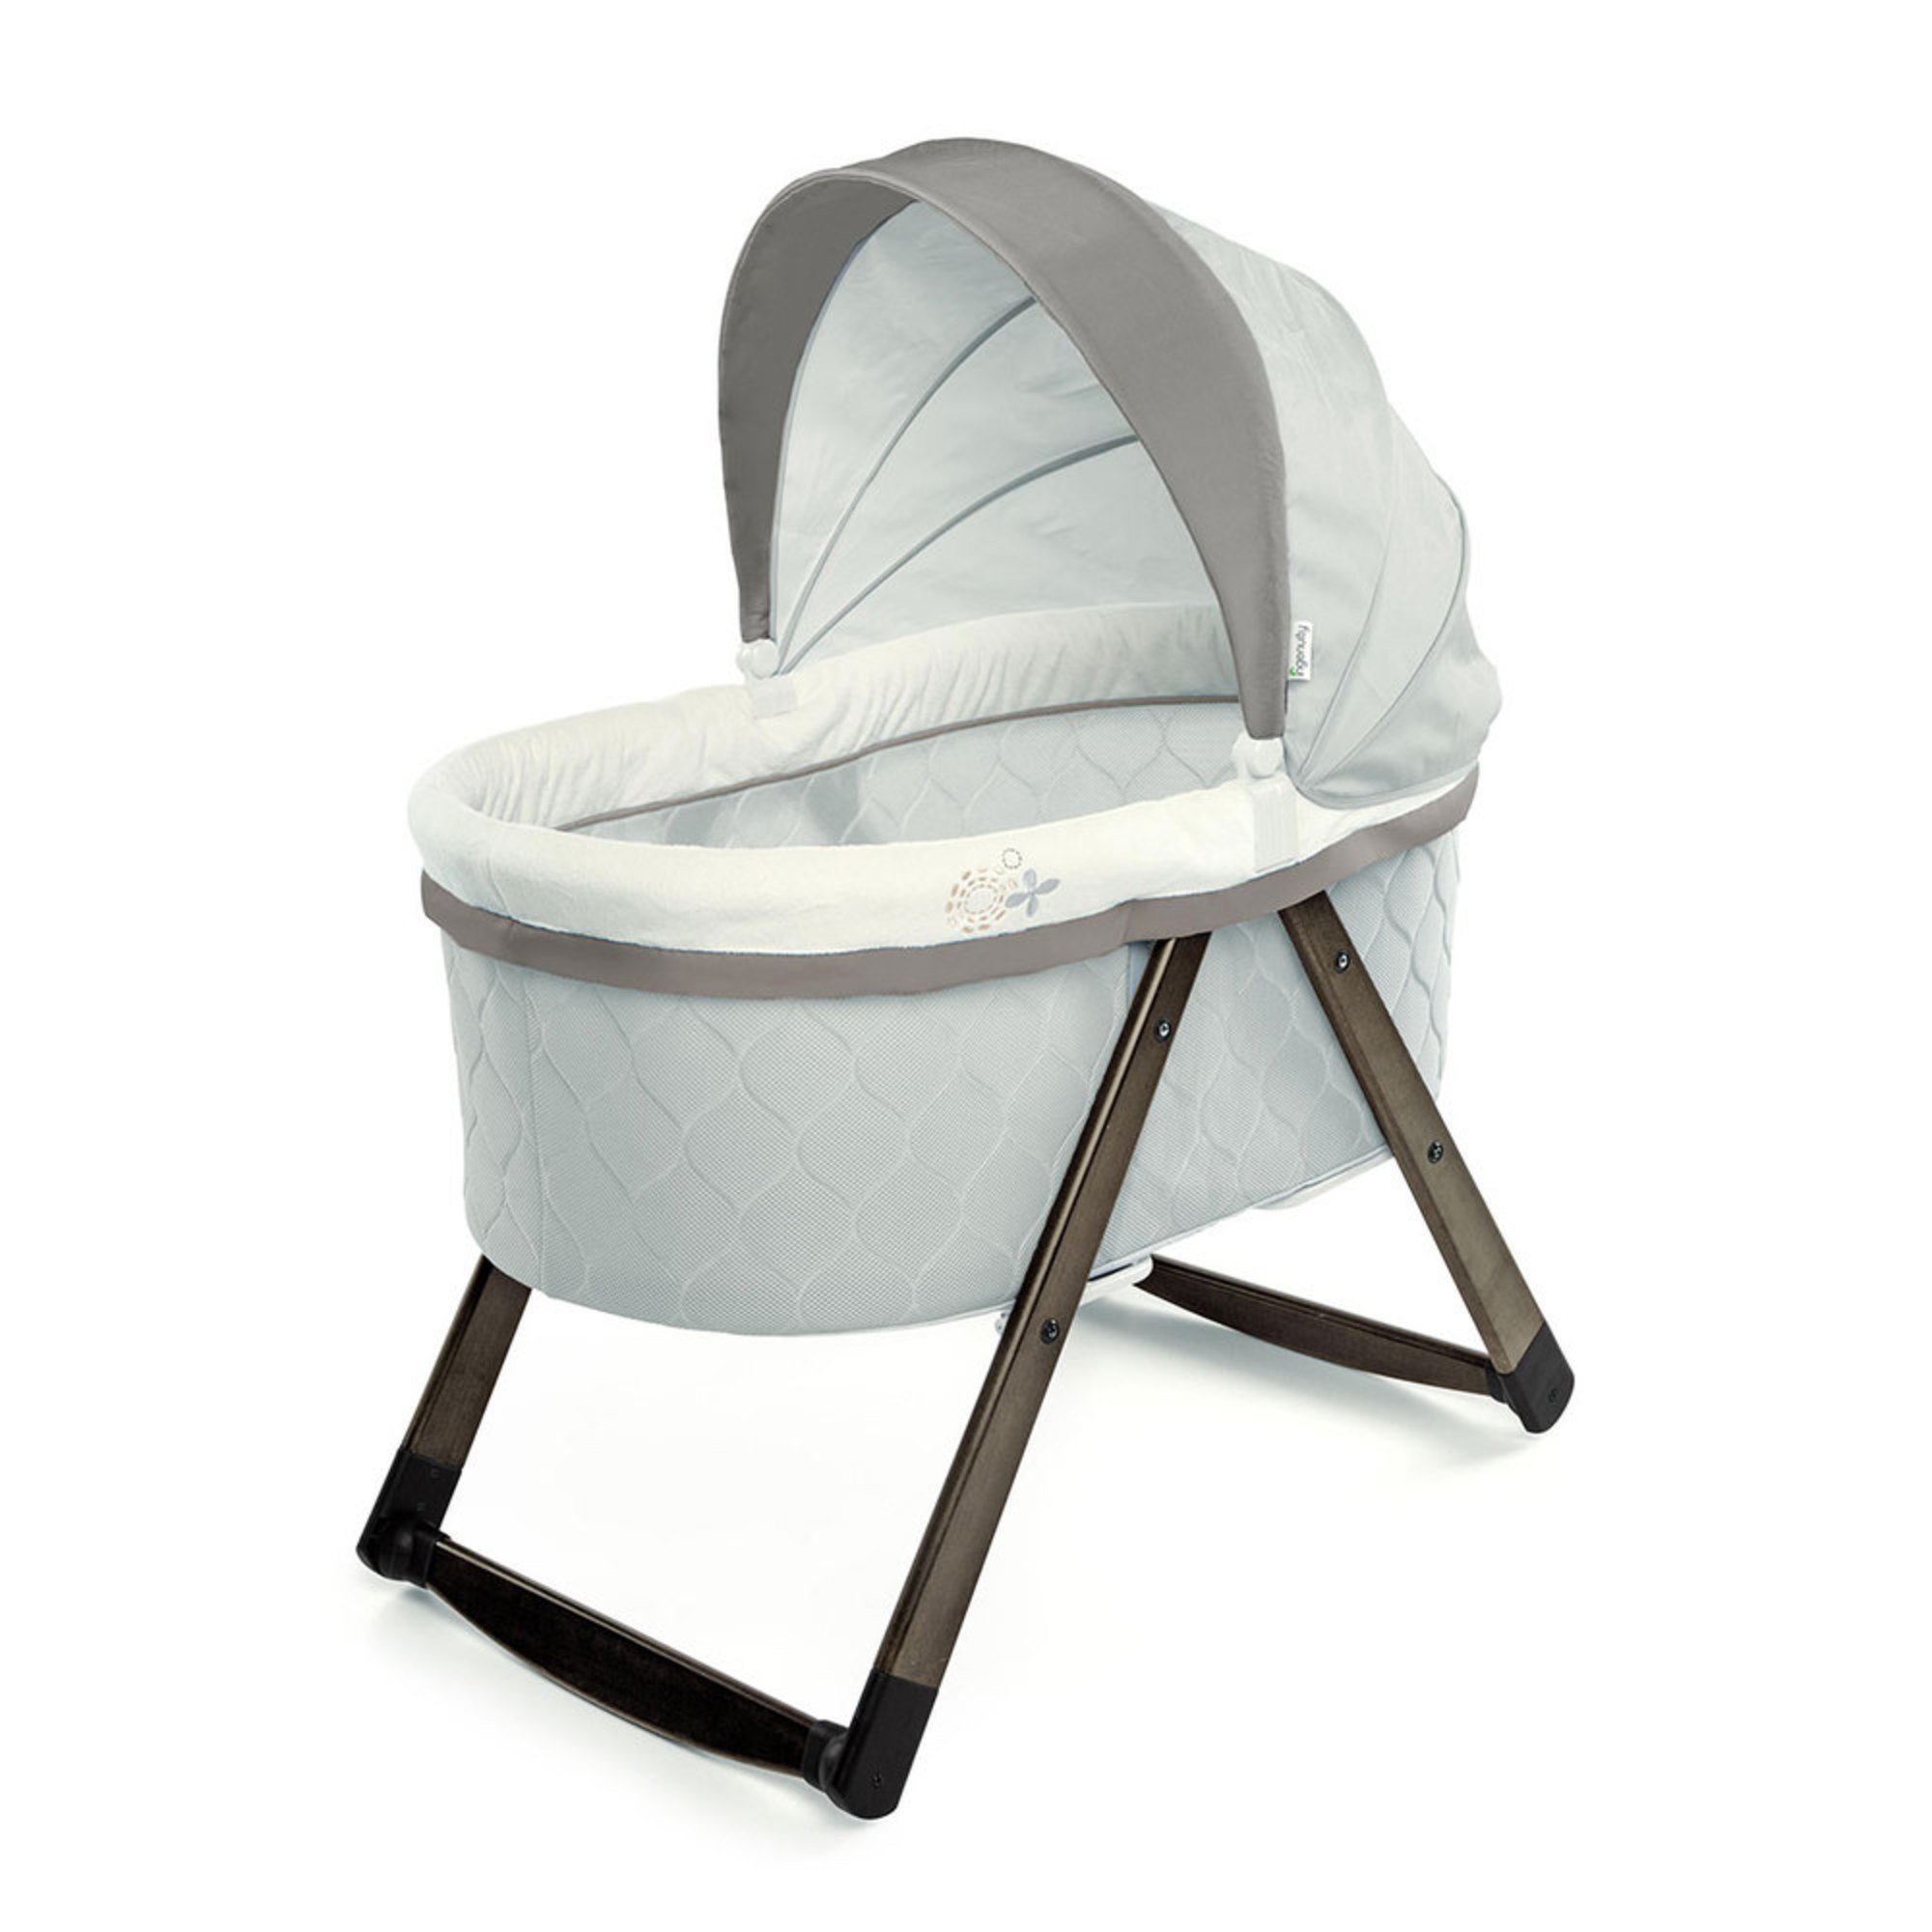 portable bassinet with canopy